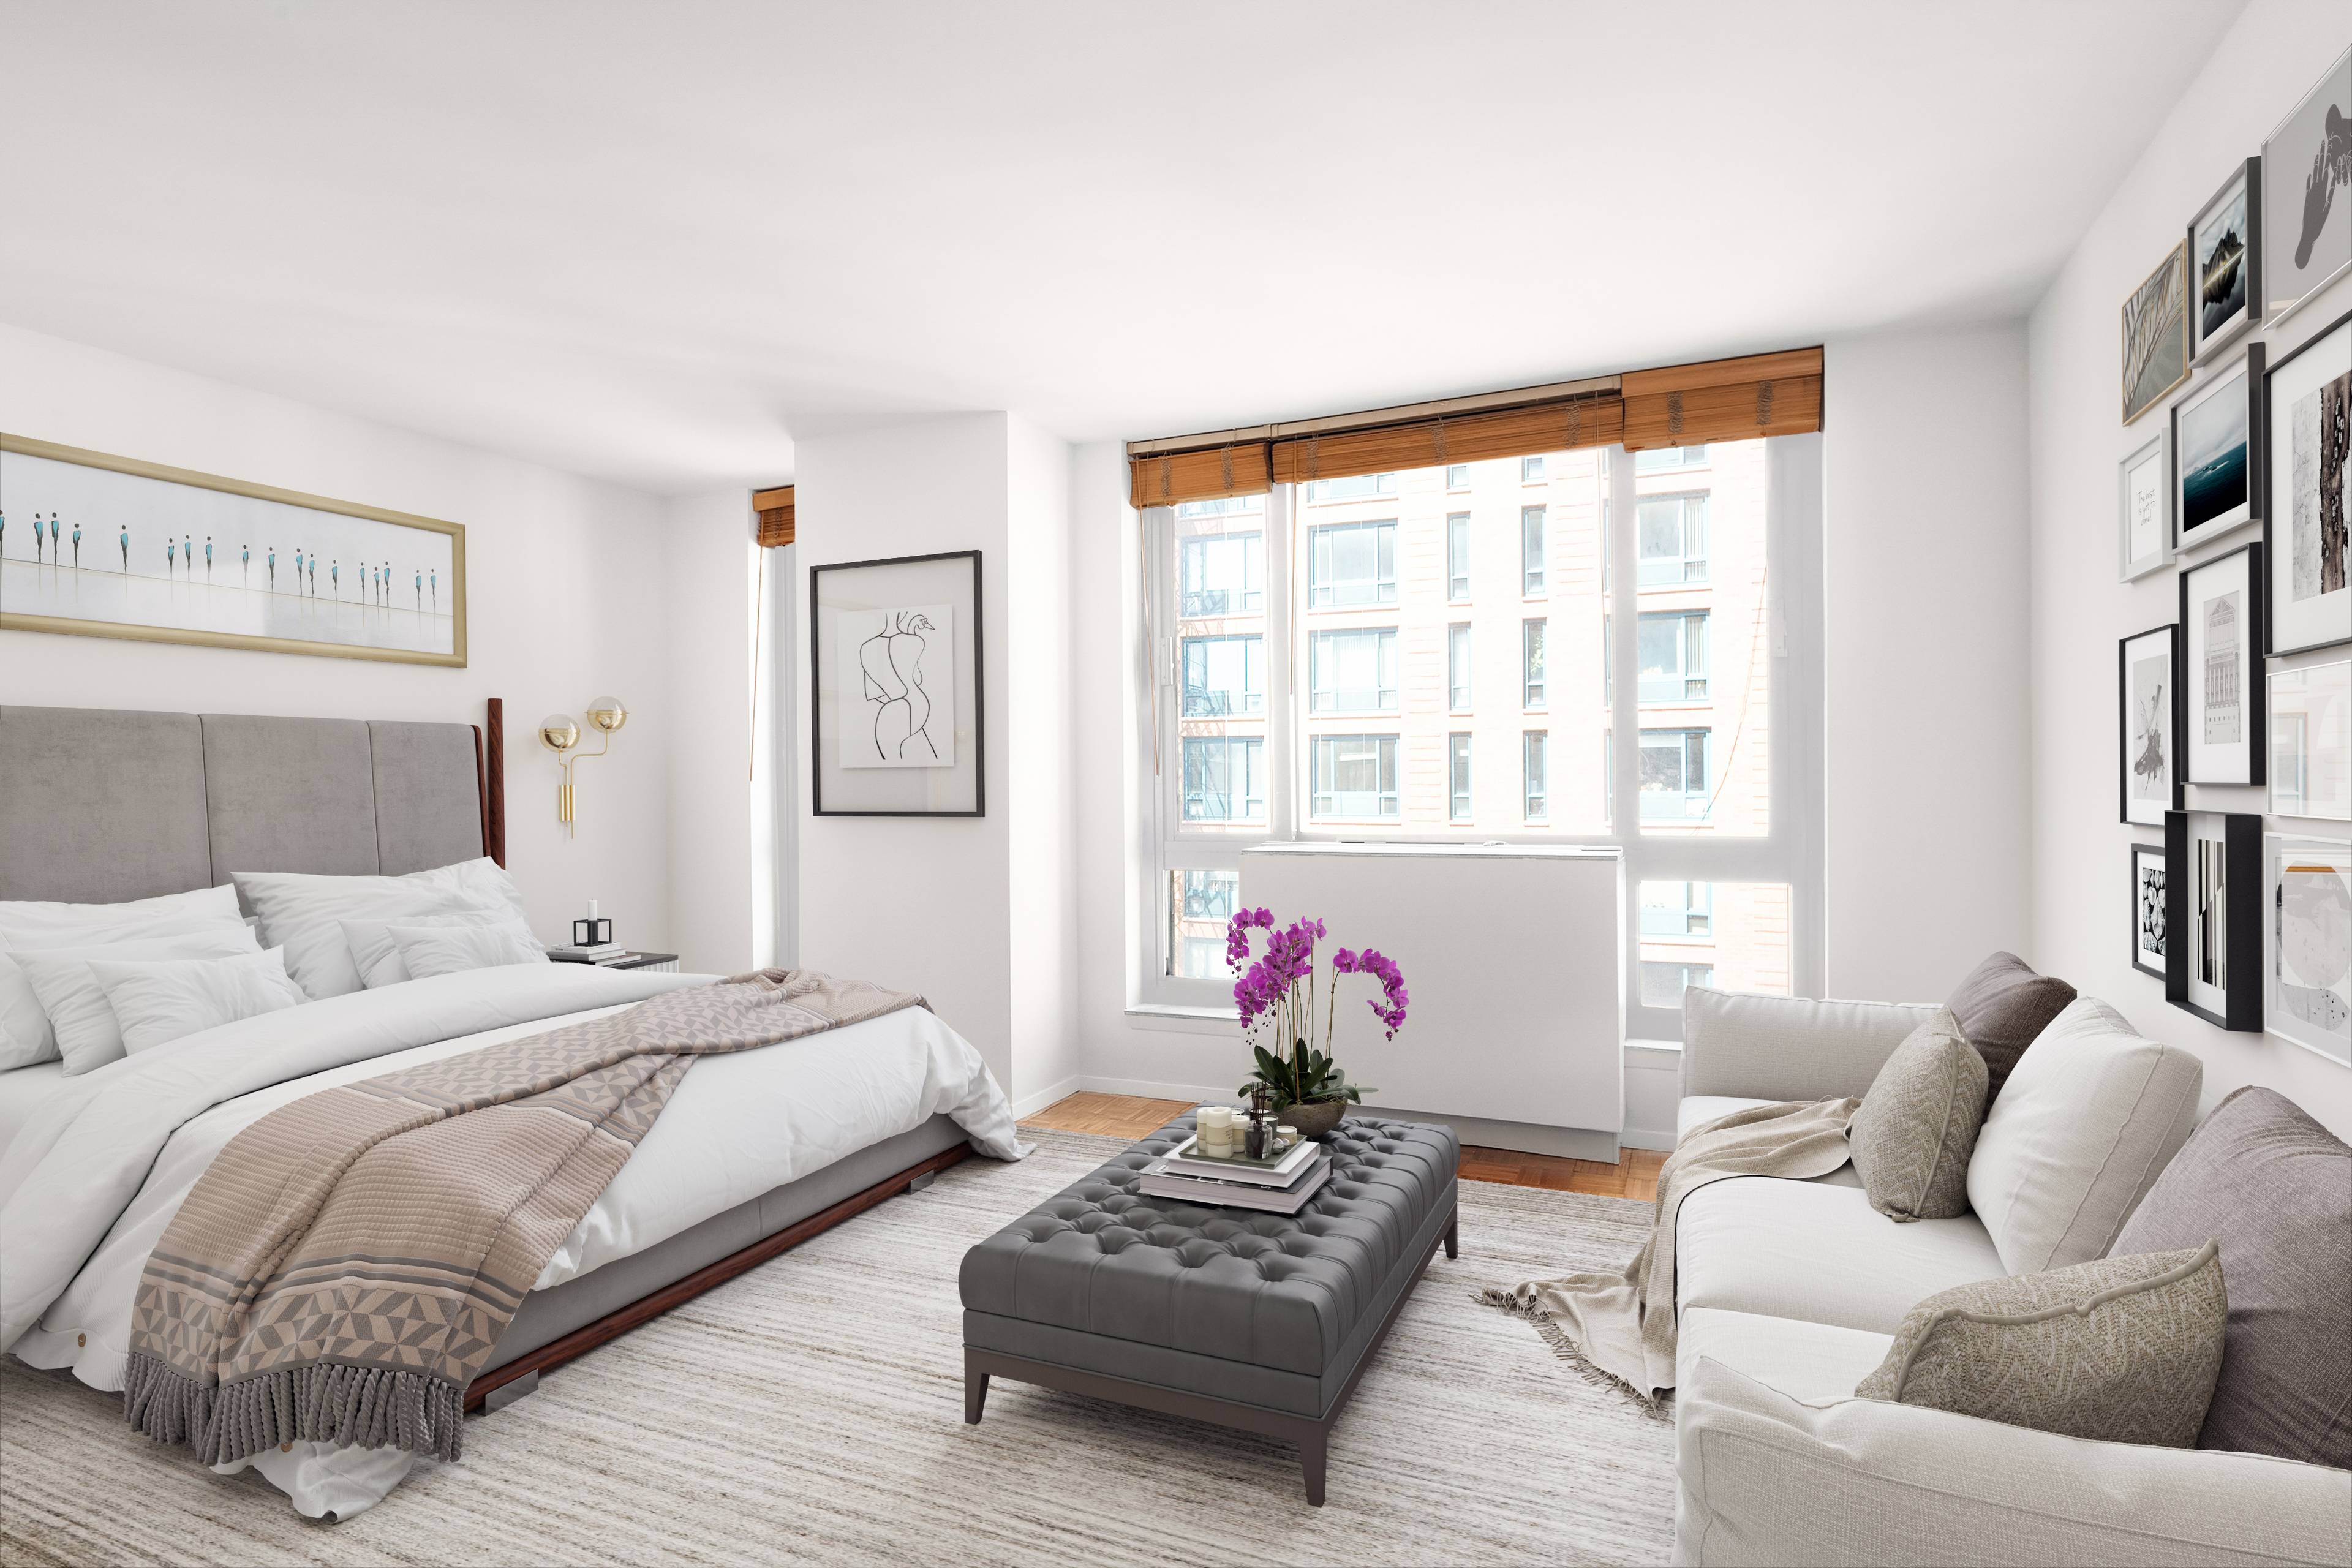 Turn key, loft like alcove studio with abundant closets and and plentiful natural light in a full service, amenity rich, luxury building off of iconic Irving Place.